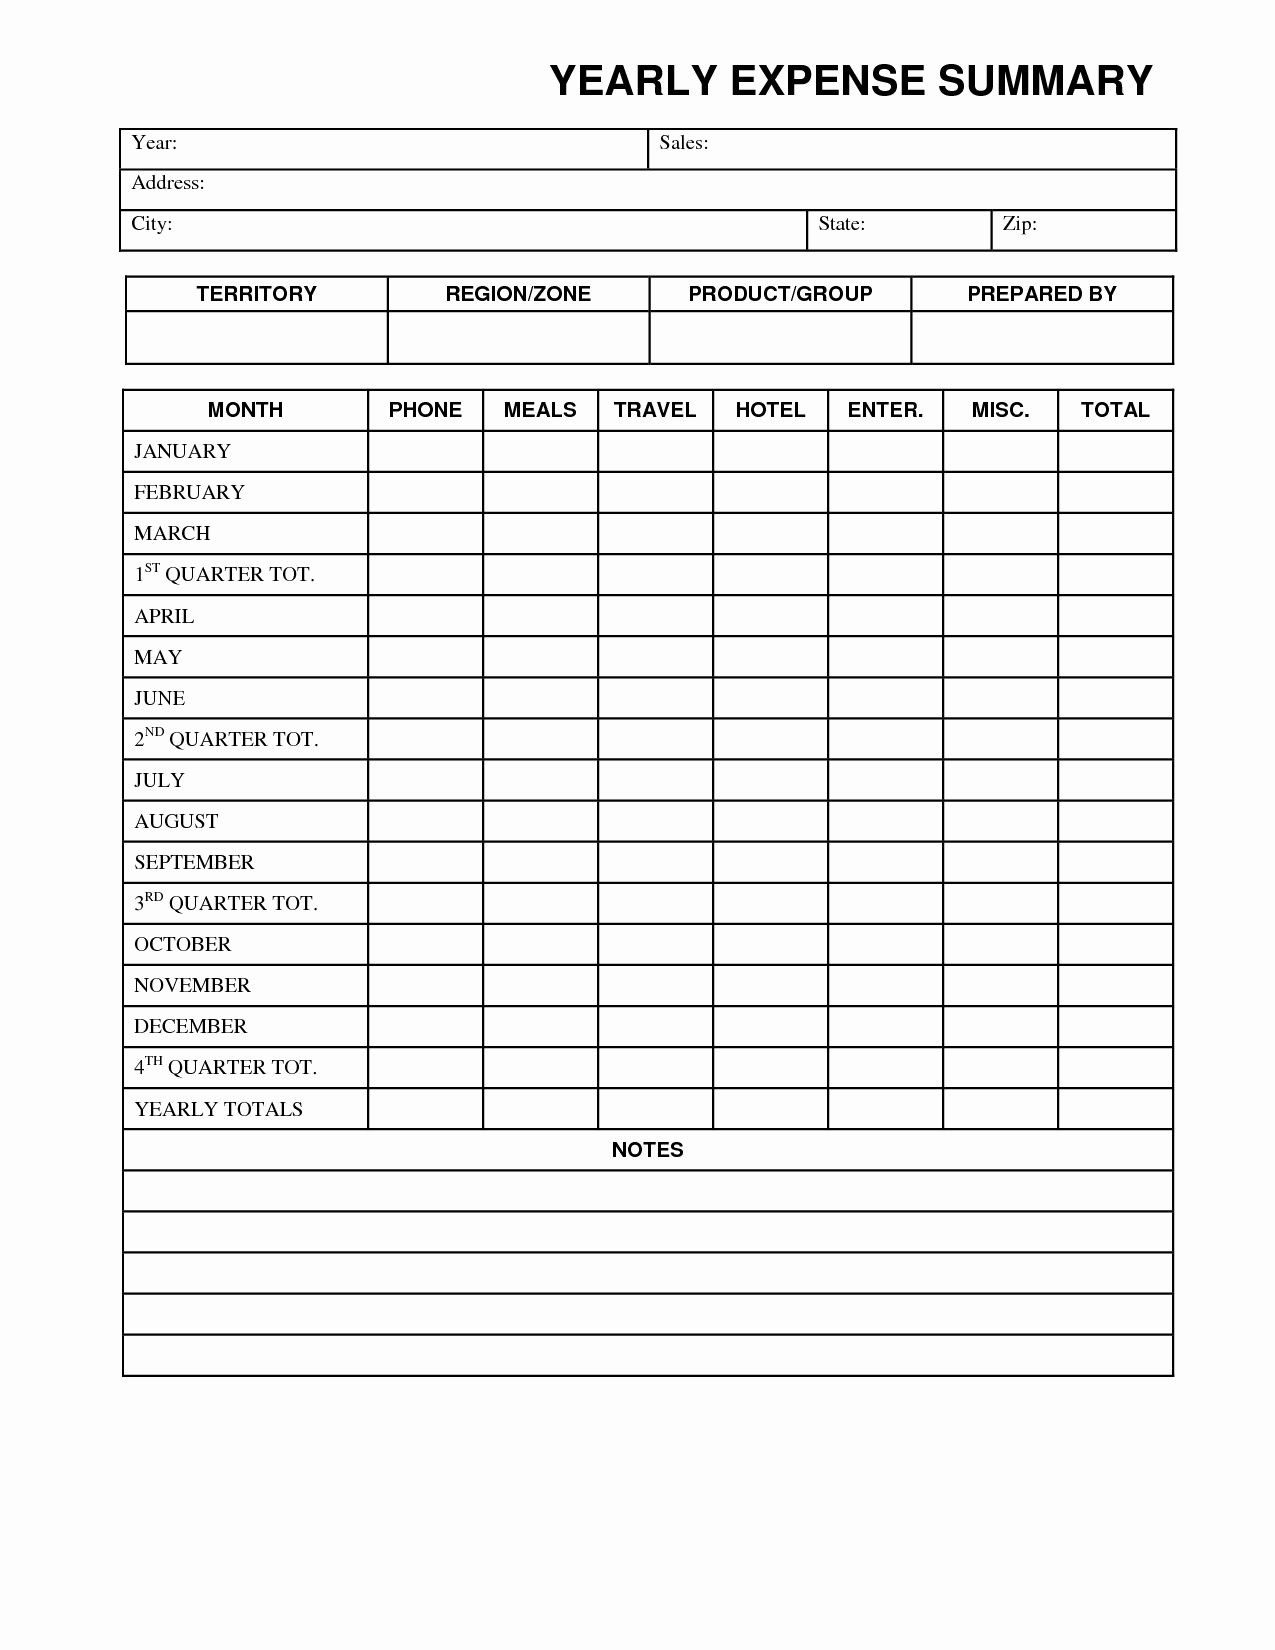 business expenses form template funeral free doc expense templates yearly summary office template